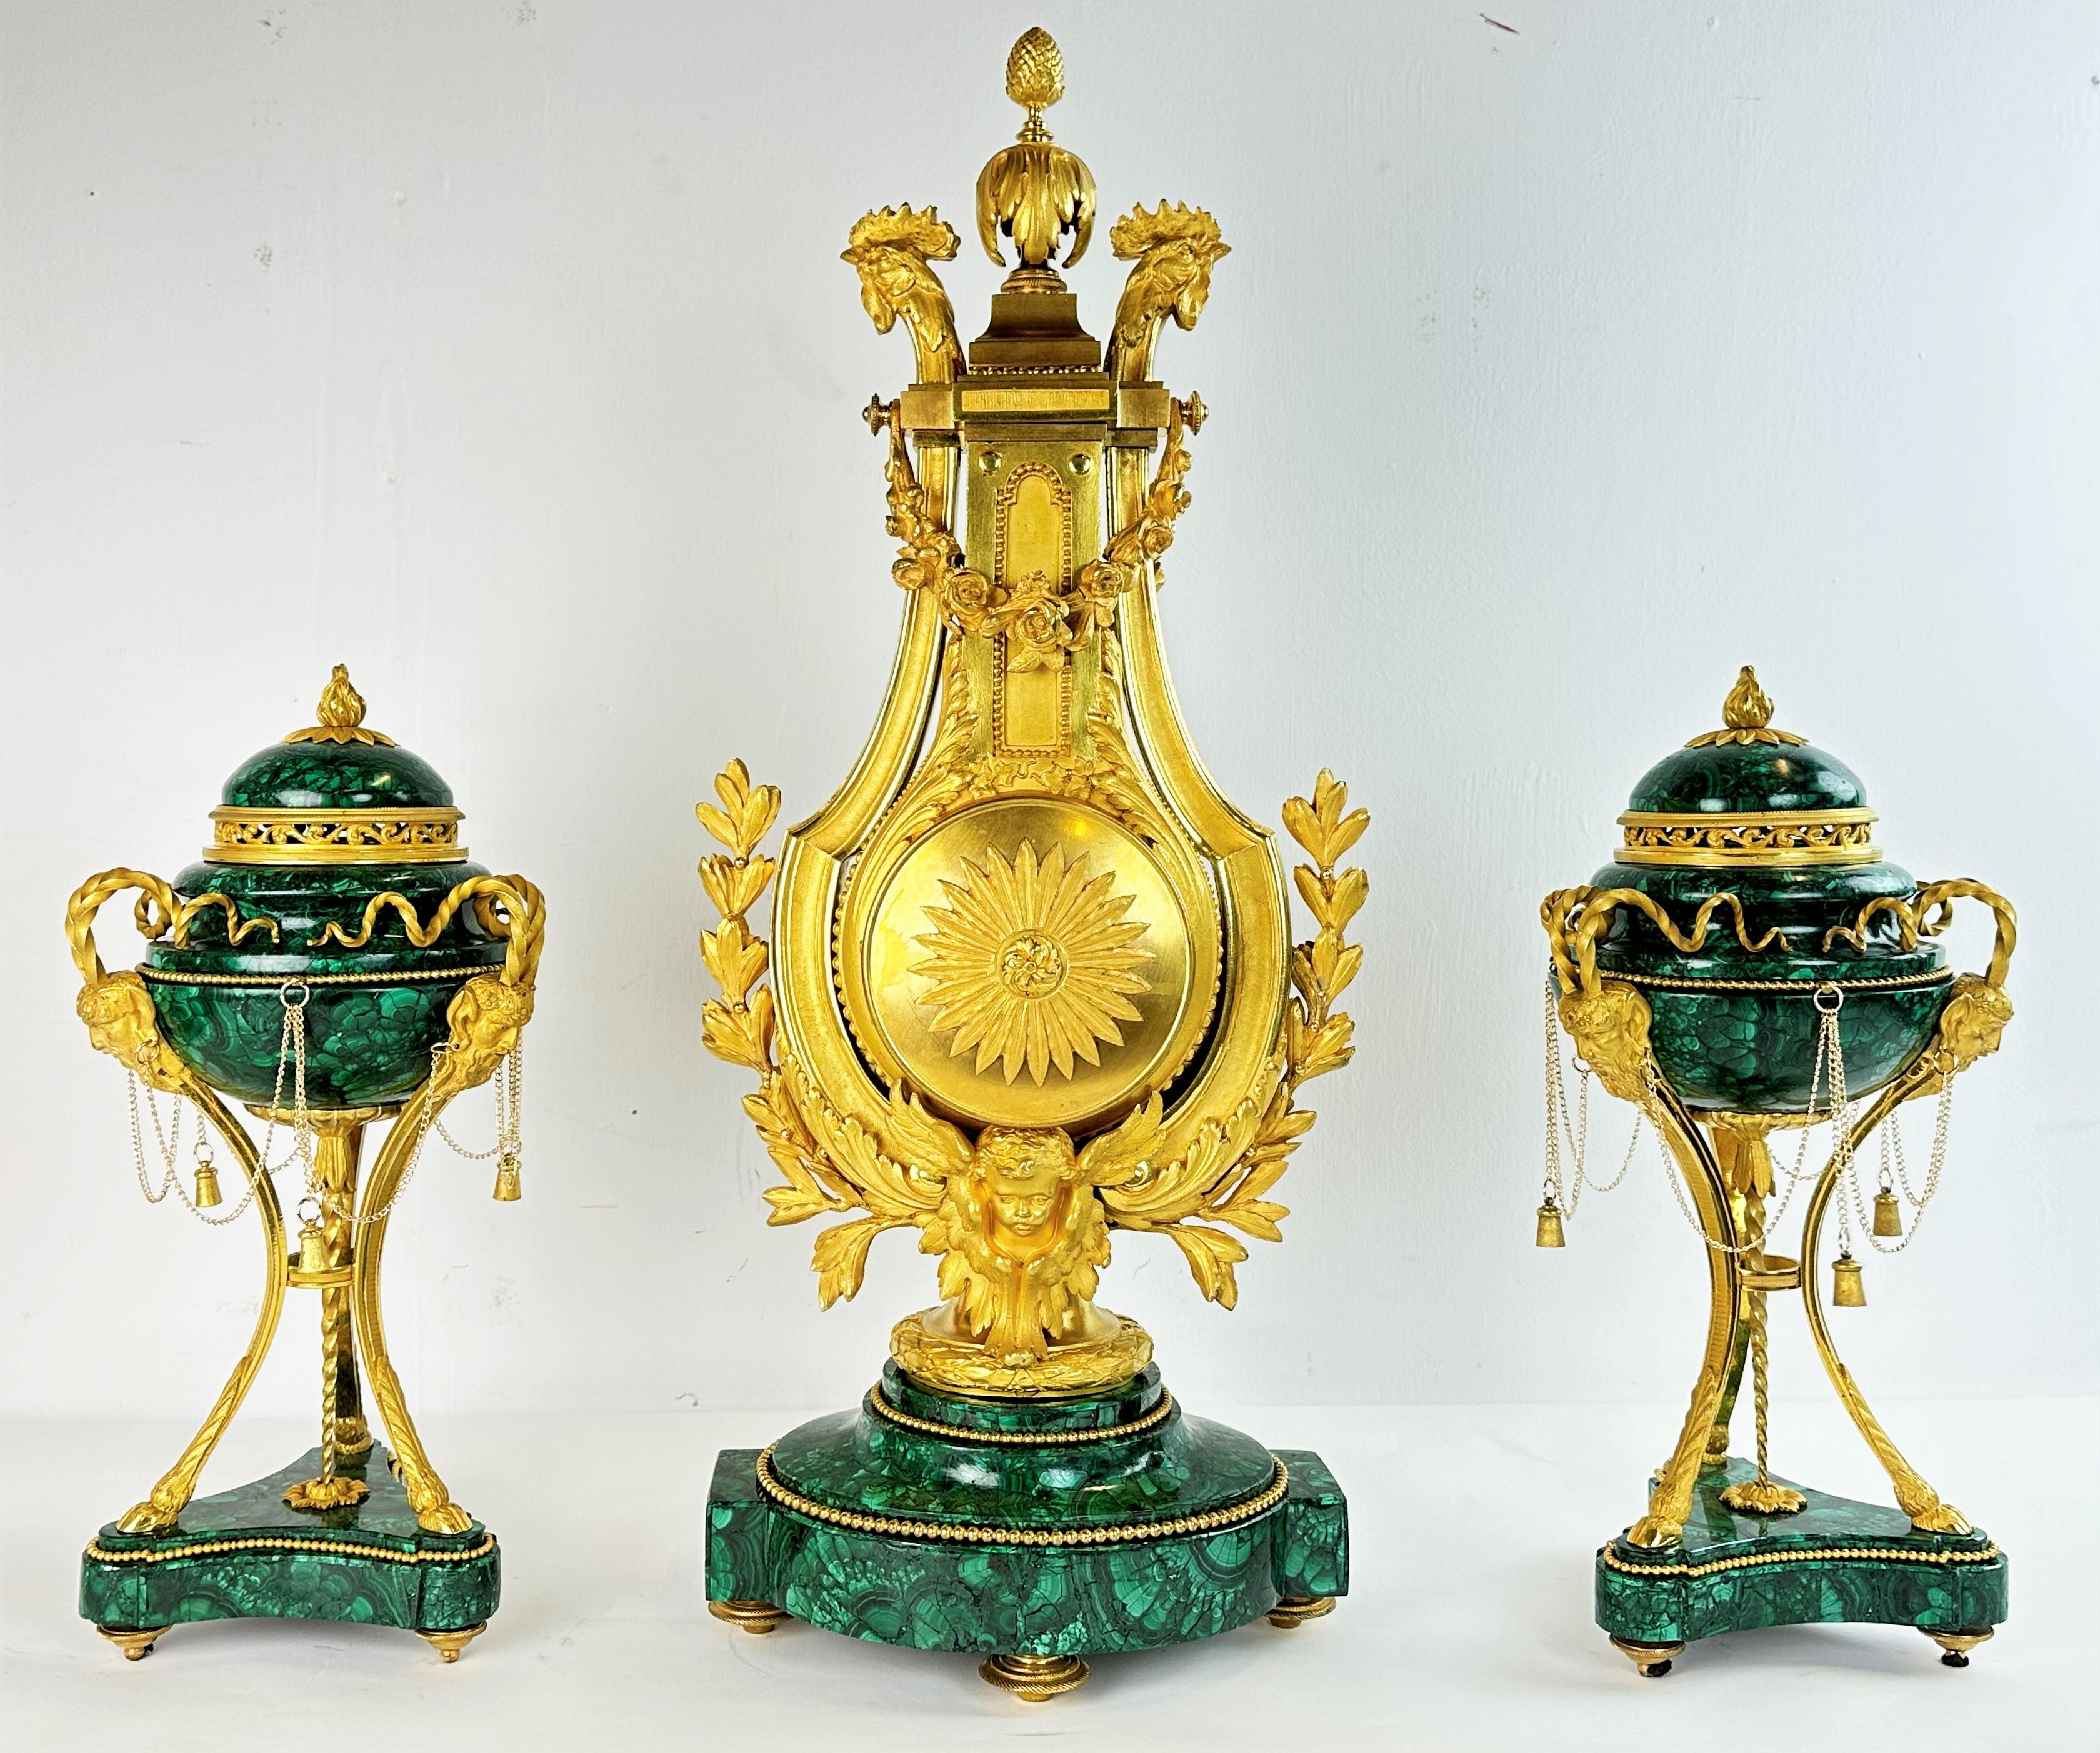 An amazing Louis XVI style suit consisting of a clock and two vases. Made of a combination of the highest quality gilded bronze castings and malachite elements, France, second half of the 19th century, around 1880. Signed 